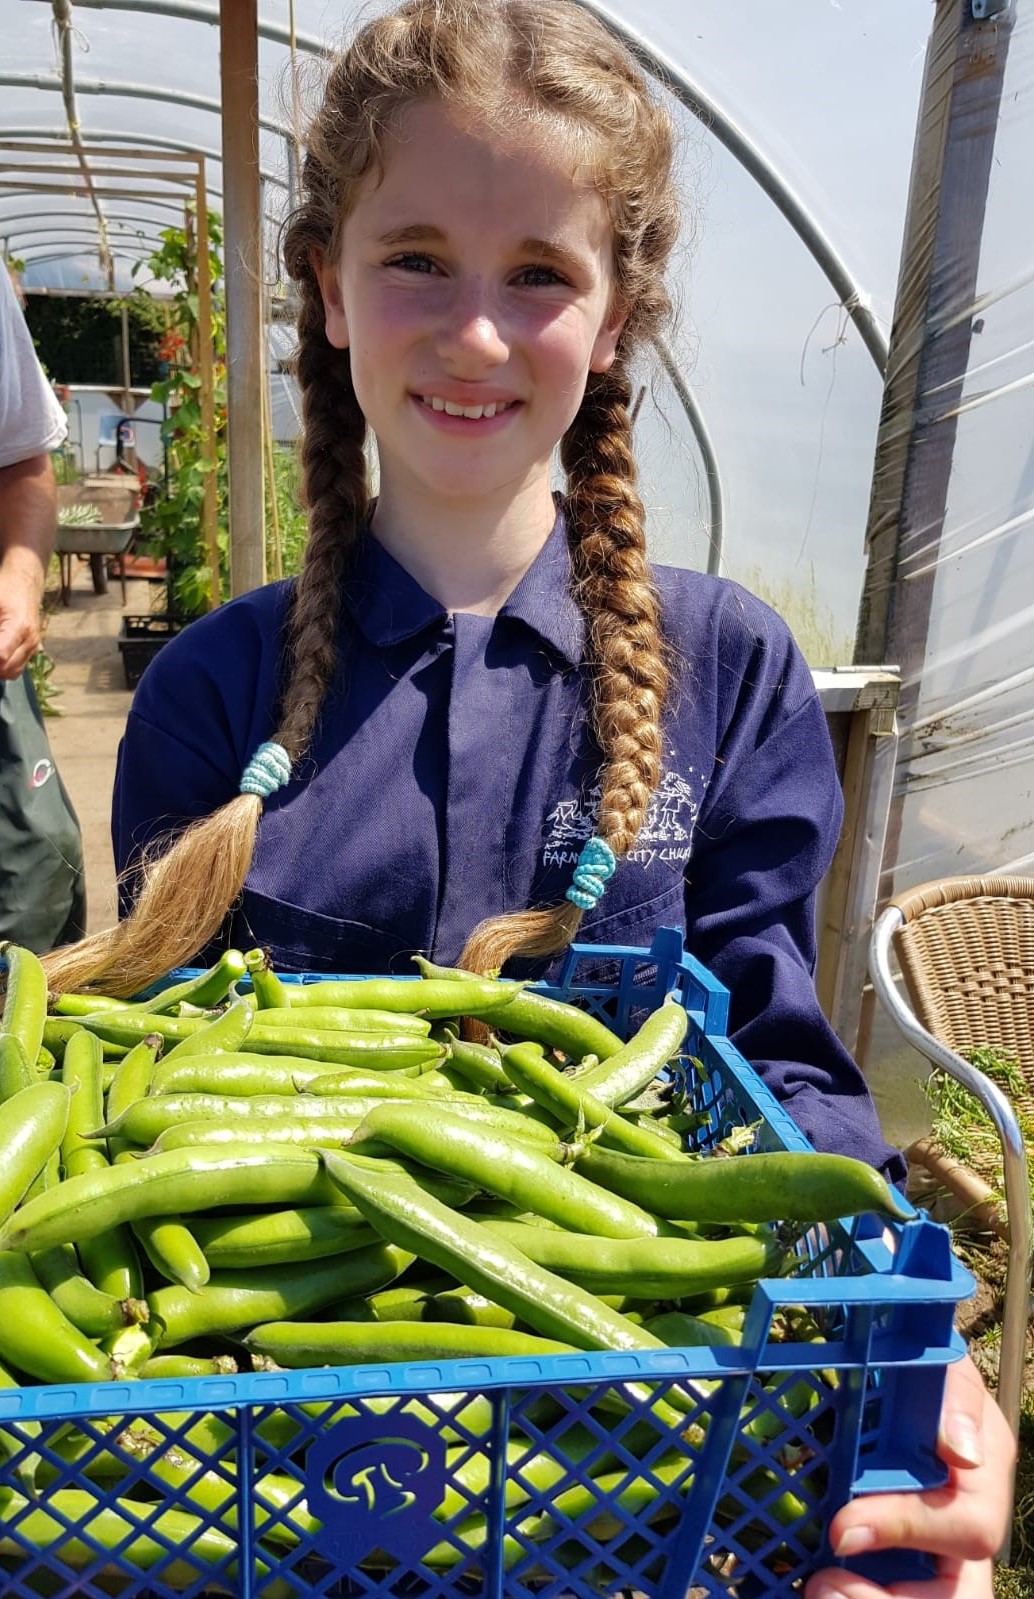 15 A S Primary girl with beans  June 2018.jpg